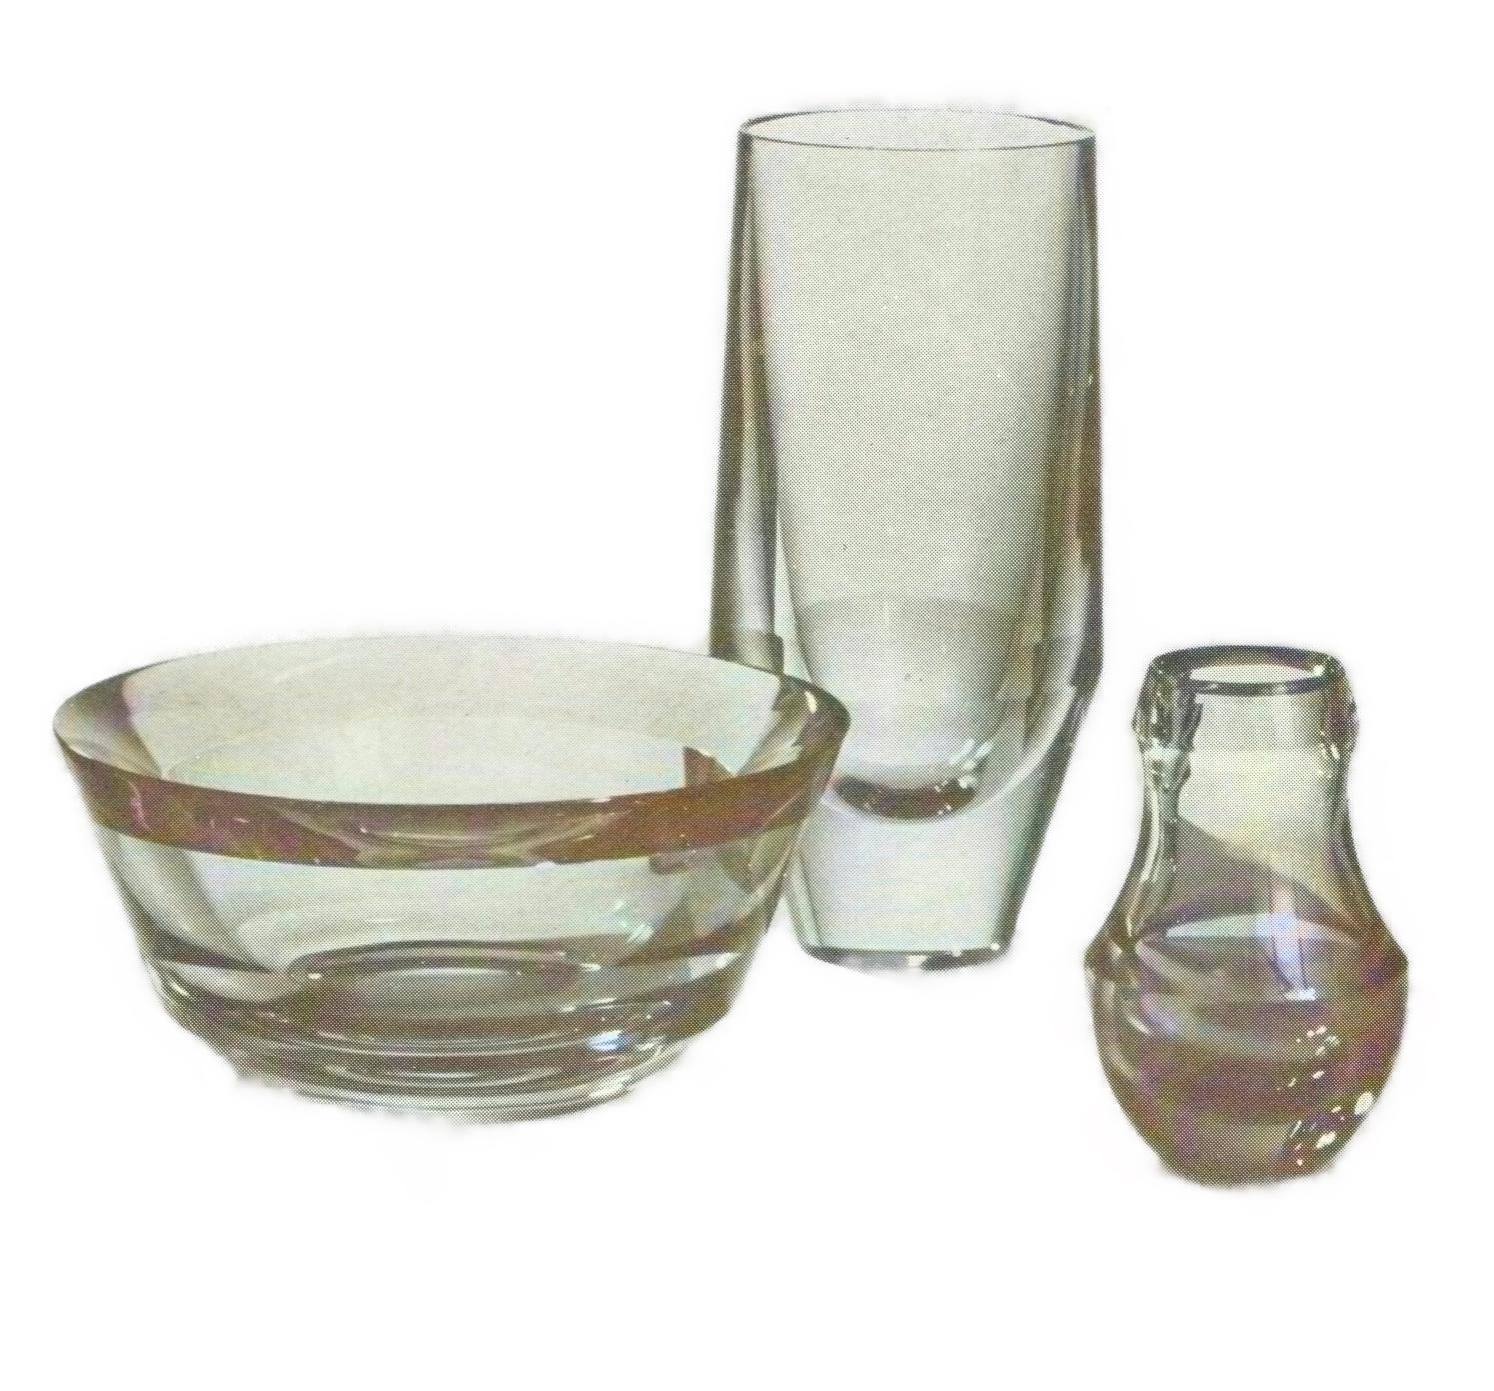 Moser - Vases and Bowl